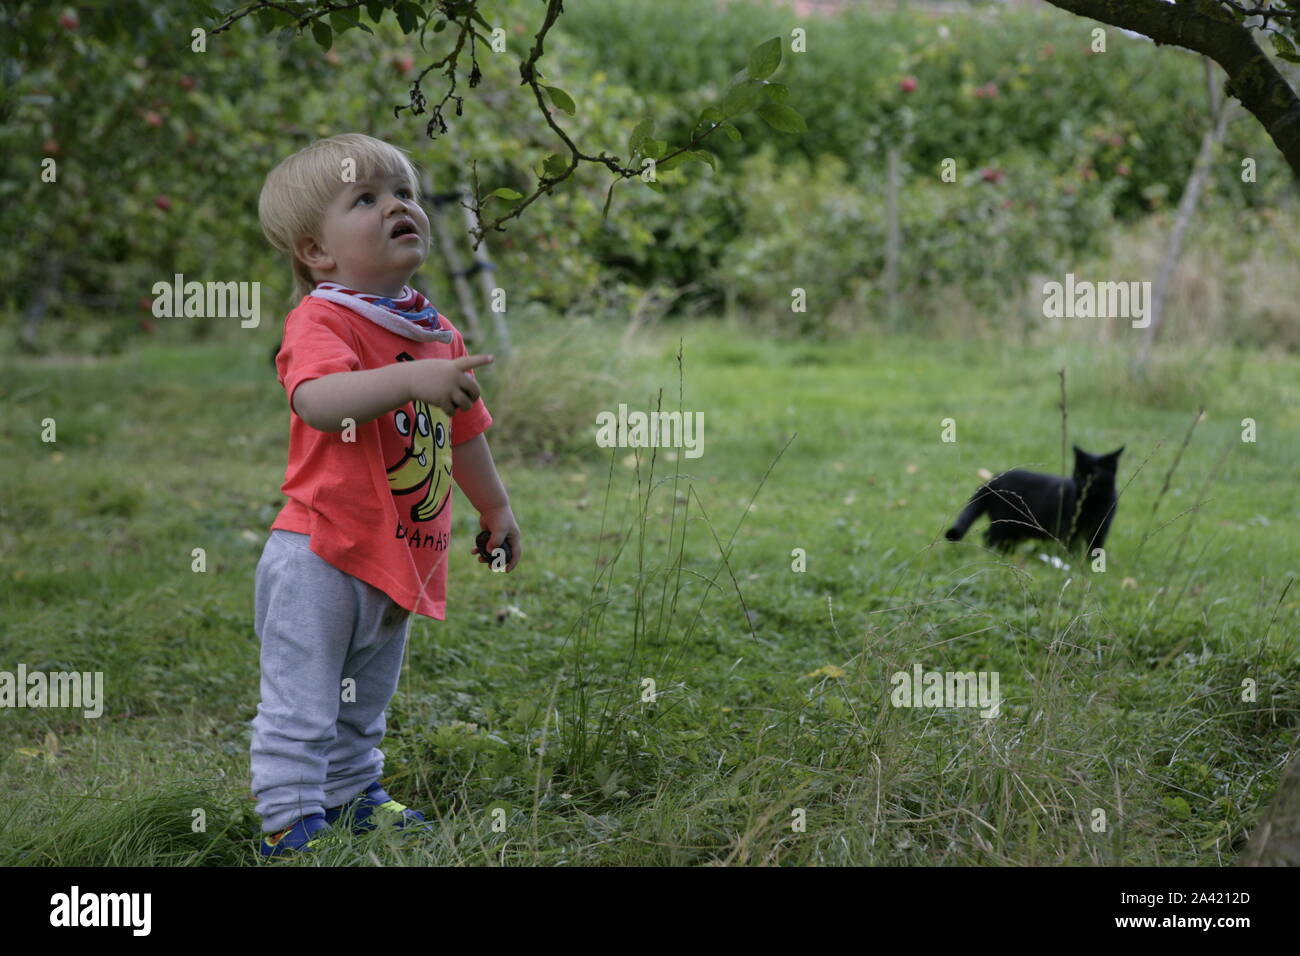 Young male Toddler Child holding prune et pointant à Tree in Orchard Banque D'Images